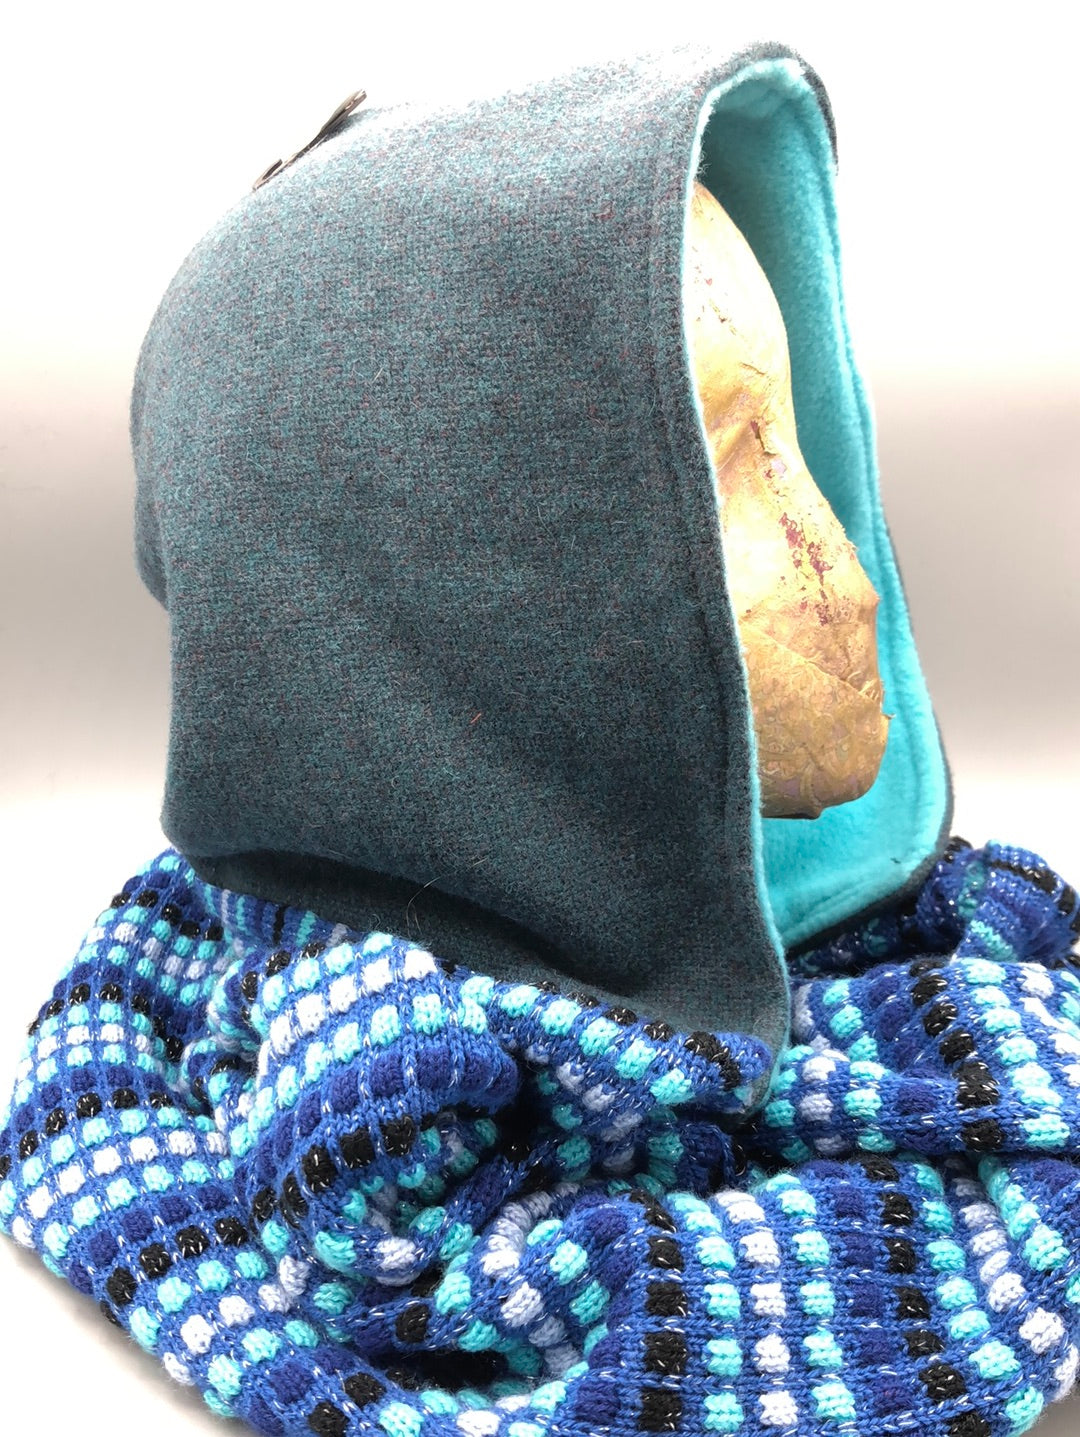 Deep Turquoise Wool Woven Hood with light Turquoise Fleece Liner and textured Blue cable Infinity Scarf